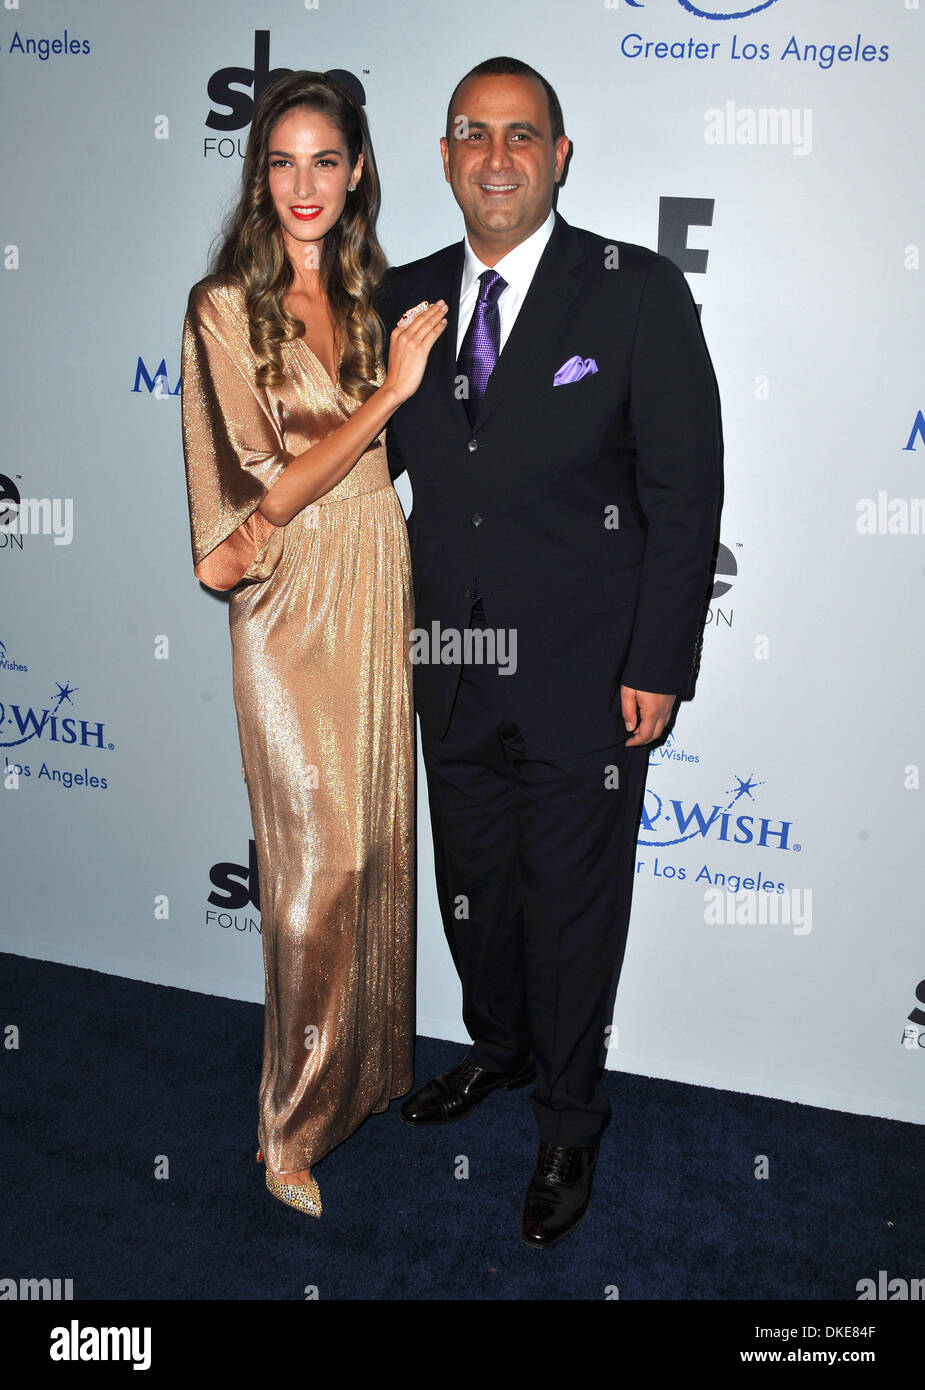 Los Angeles, California, USA. 4th Dec, 2013. Sam Nazarian attending The Make-A-Wish Foundation Of Greater Los Angeles 2013 Wishing Well Winter Gala held at the Beverly Wilshire Hotel on December 4, 2013. 2013 Credit:  D. Long/Globe Photos/ZUMAPRESS.com/Alamy Live News Stock Photo